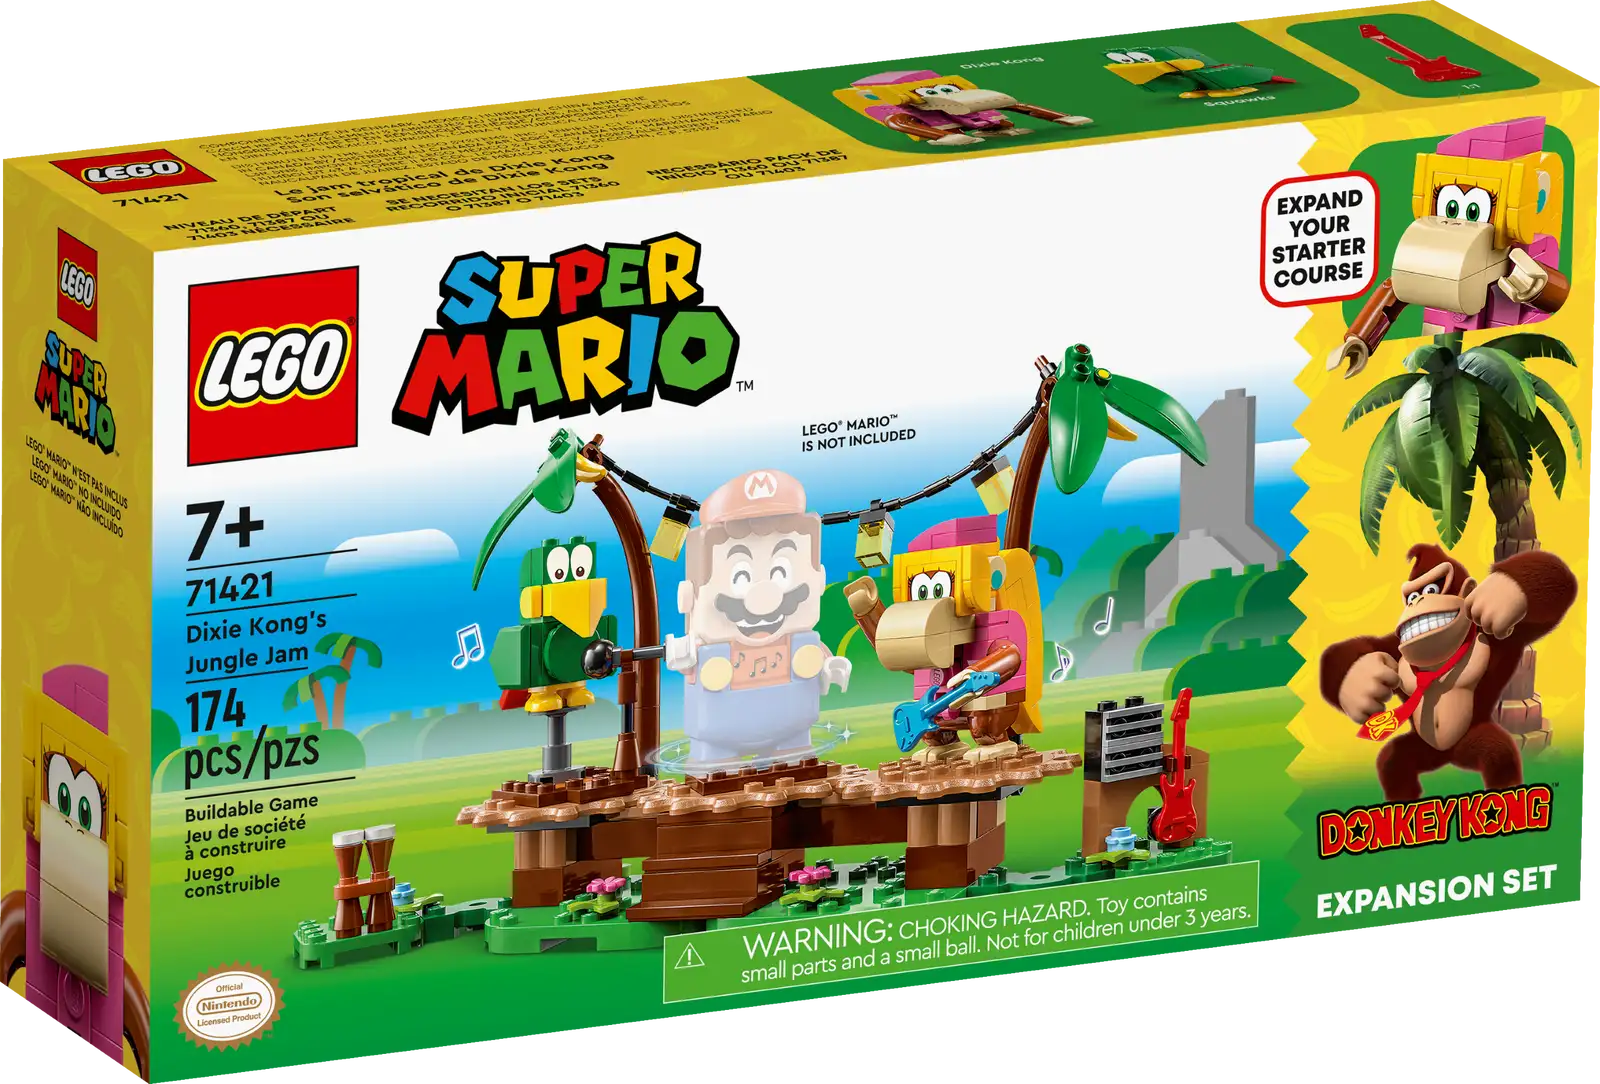 Children can venture into the jungle home of Donkey Kong™ for musical fun with this LEGO® Super Mario™ Dixie Kong’s Jungle Jam Expansion Set (71421). It features Dixie Kong and Squawks figures, a buildable stage, jungle scenery and musical instruments and equipment. Place LEGO® Mario™, LEGO® Luigi™ or LEGO® Peach™ (figures not included) center stage and turn them to make the connected stage platforms rotate, activating musical sounds. Note: the 71360, 71387 or 71403 Starter Course is required for interactive play. Companion app Download the LEGO Super Mario app for building instructions and other fun stuff to enhance youngsters’ creative experience. Gift idea This collectible playset makes a super gift toy for creative kids aged 7 and up who love music and animals – and adults with nostalgic memories of Donkey Kong will love it too! This and the many other LEGO Super Mario Expansion Sets allow fans to expand, rebuild and create their own levels for hours of coin-collecting play. Set the stage for musical fun – Kids can visit the jungle home of Donkey Kong™ with this LEGO® Super Mario™ Dixie Kong’s Jungle Jam Expansion Set (71421) and enjoy a musical adventure 2 LEGO® Super Mario™ characters from the jungle home of Donkey Kong™ – Dixie Kong with a guitar element and Squawks the parrot with a buildable microphone, plus buildable bongos and an amplifier Rotating stage platforms – Place LEGO® Mario™, LEGO® Luigi™ or LEGO® Peach™ (figures not included) center stage and turn them to make the connected stage platforms rotate, activating musical sounds Social play – There is space on the stage for a second interactive figure. The set also includes jungle scenery including 2 buildable palm trees, lighting and flower elements Gift for ages 7 and up – This 174-piece set makes a fun birthday or holiday gift for kids who own a LEGO® Super Mario™ Starter Course (71360, 71387 or 71403), which is needed for interactive play Fun combos – Measuring over 5 in. (12 cm) high, 9.5 in. (24 cm) wide and 4 in. (10 cm) deep in its basic formation, this modular set combines with other LEGO® Super Mario™ toy playsets Digital instructions – Download the LEGO® Super Mario™ app for building instructions, inspiring ideas and more. For a list of compatible Android and iOS devices, visit LEGO.com/devicecheck Inspire kids’ creativity – Collectible LEGO® Super Mario™ toys are designed for solo or social play, offering coin-collecting fun and unlimited creative challenges through expansion and rebuilding Premium quality – LEGO® components satisfy rigorous industry quality standards, ensuring that they connect simply and strongly for robust builds Safety first – LEGO® building bricks are dropped, heated, crushed, twisted and analyzed to make sure that they comply with strict global safety standards